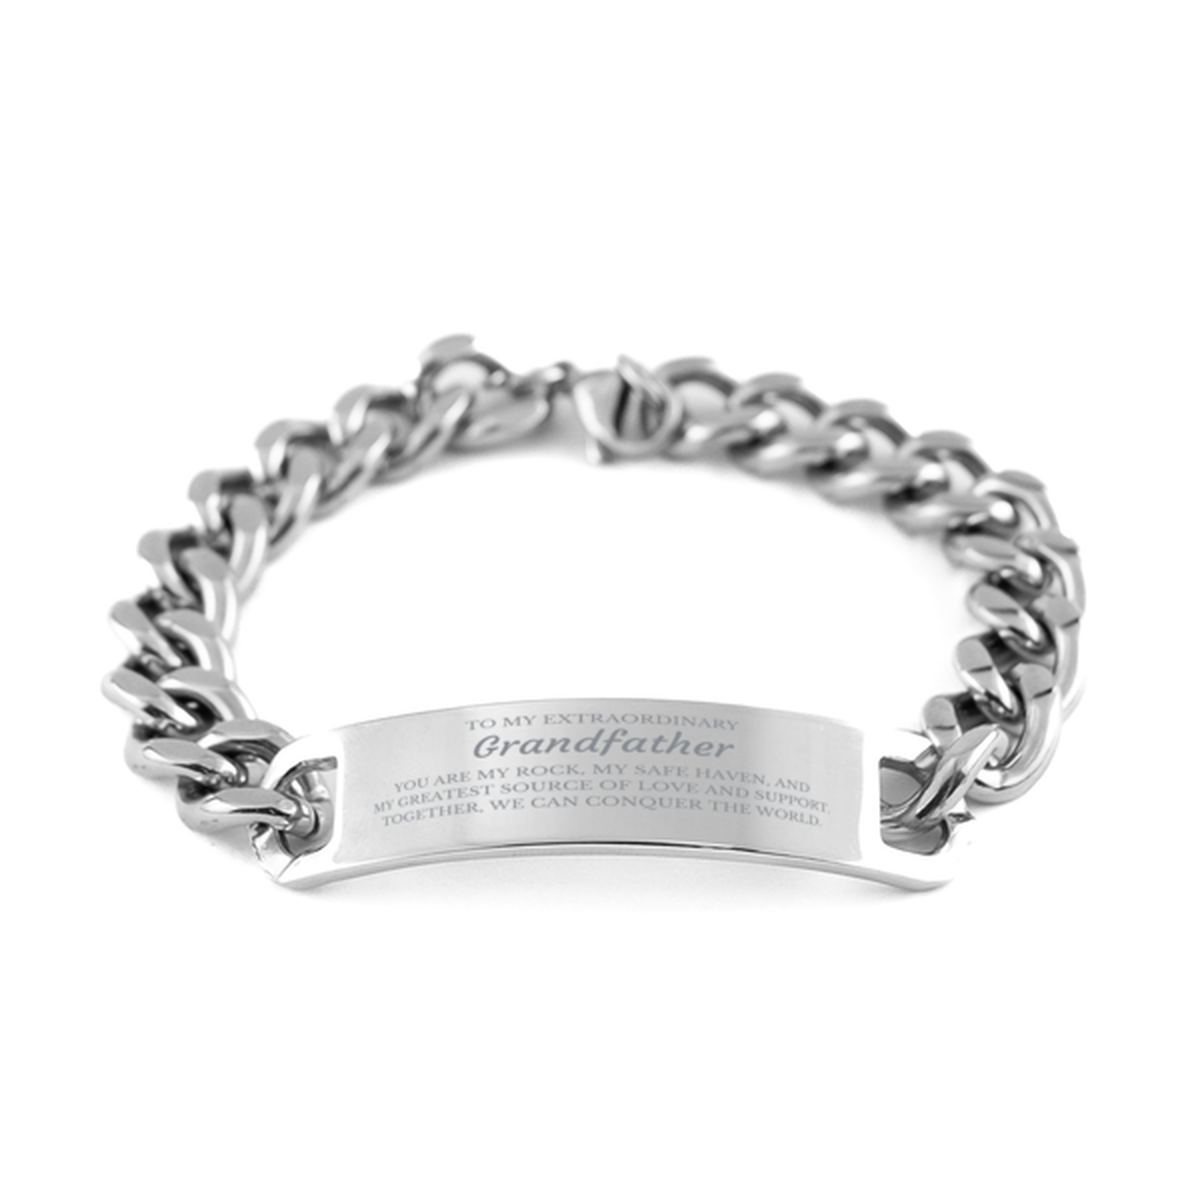 To My Extraordinary Grandfather Gifts, Together, we can conquer the world, Birthday Cuban Chain Stainless Steel Bracelet For Grandfather, Christmas Gifts For Grandfather